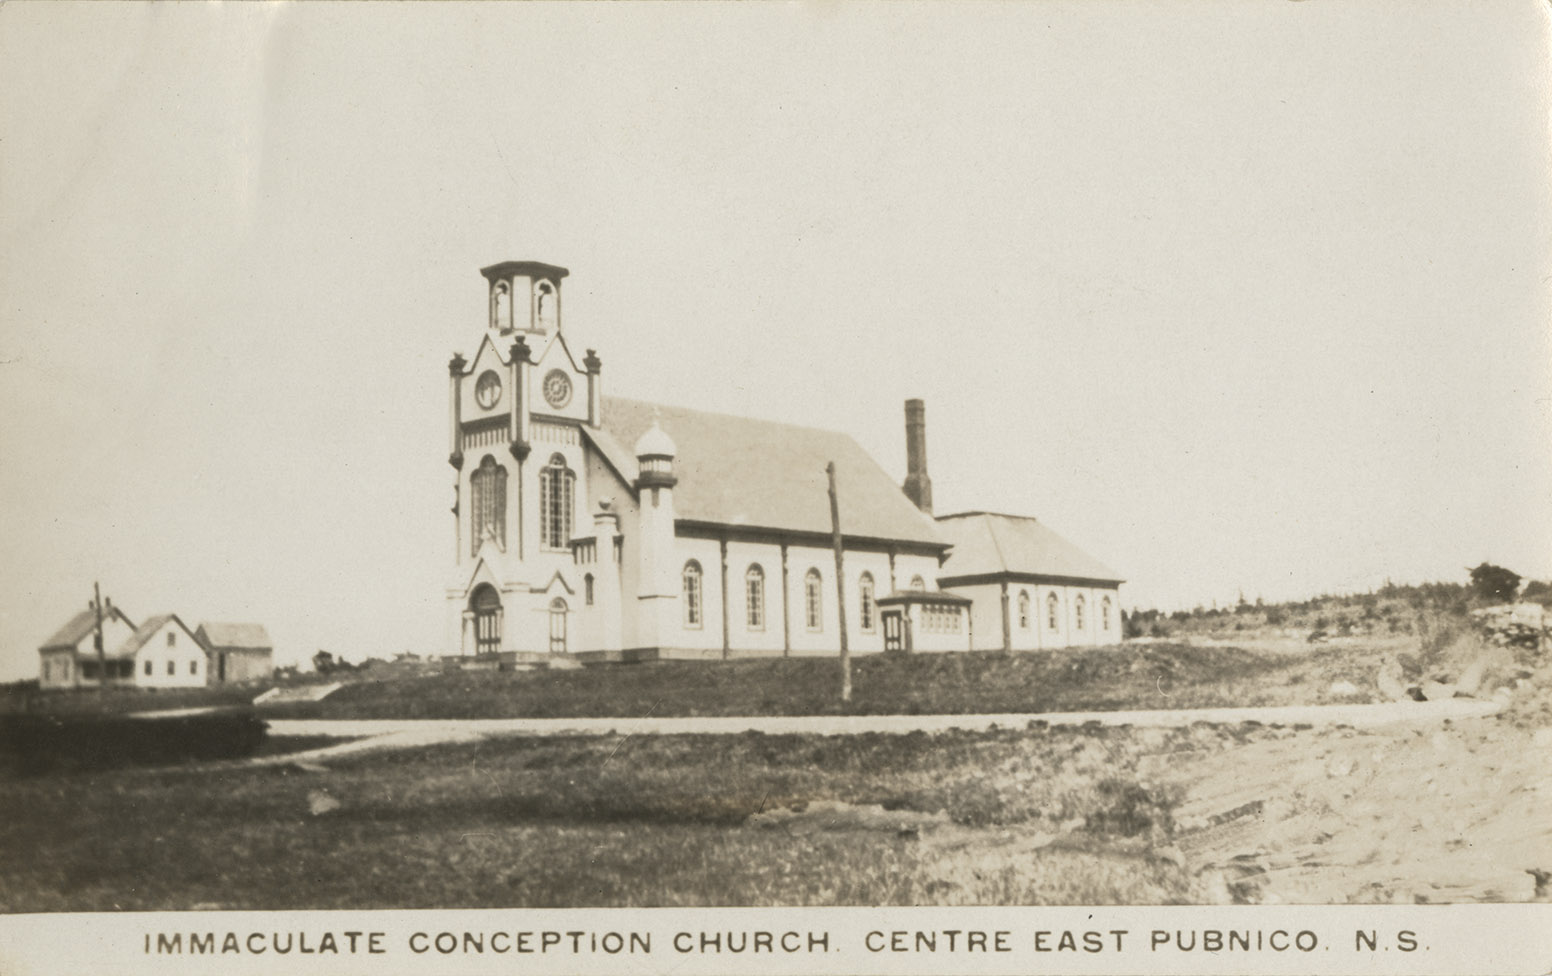 communityalbums - Immaculate Conception Church, Centre East Pubnico